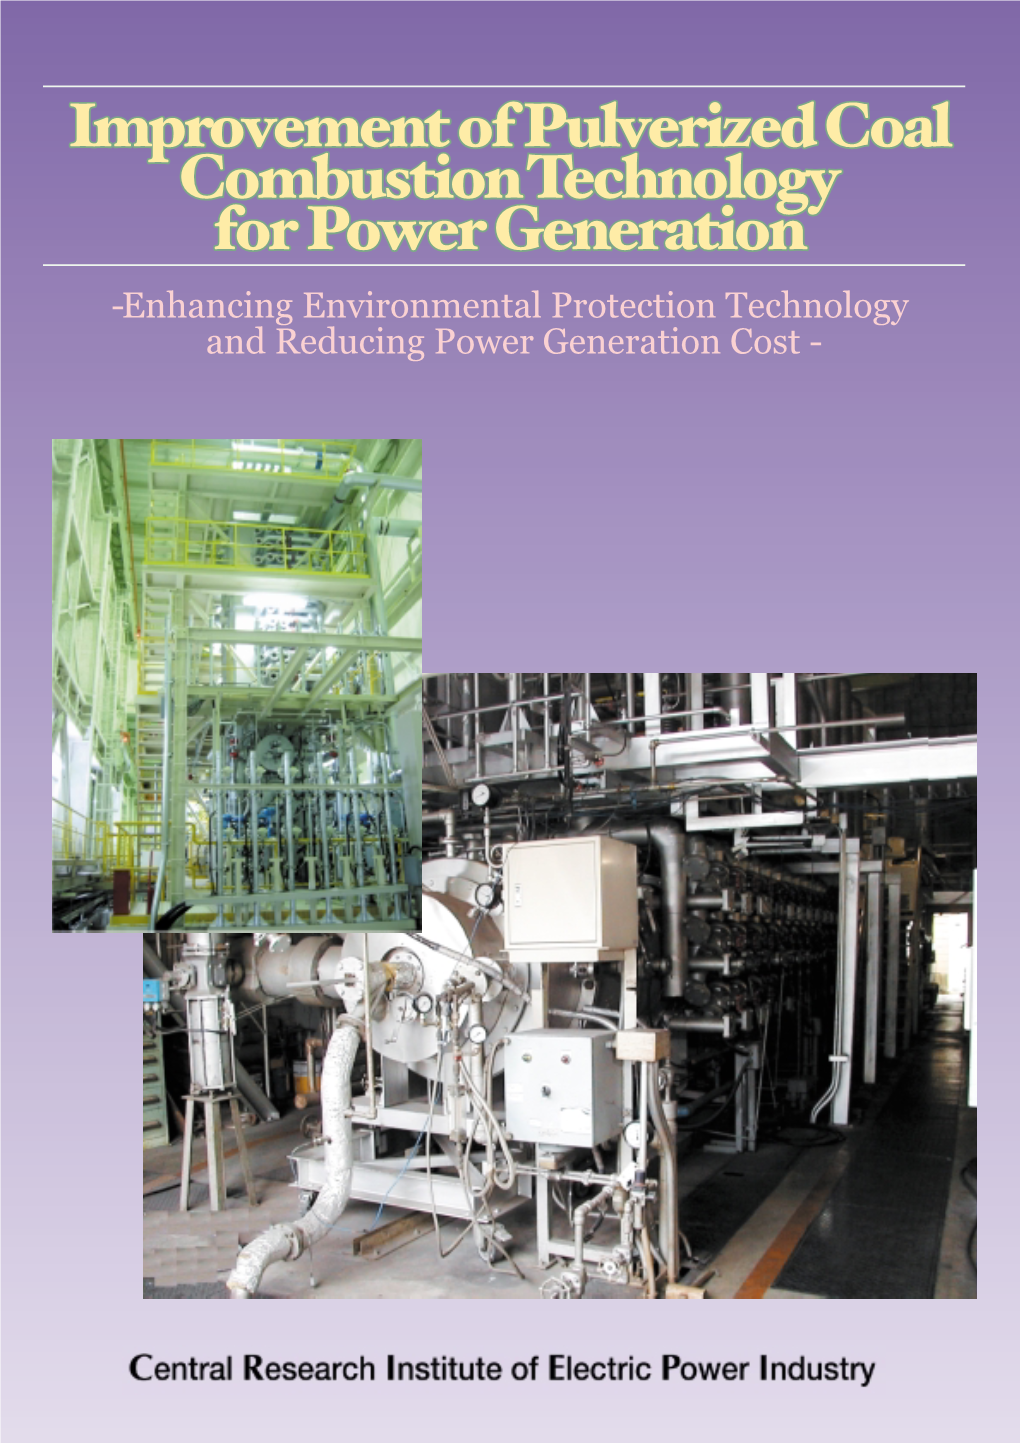 Of Advanced Pulverized Coal Fired Power Plants …………………………………… 19